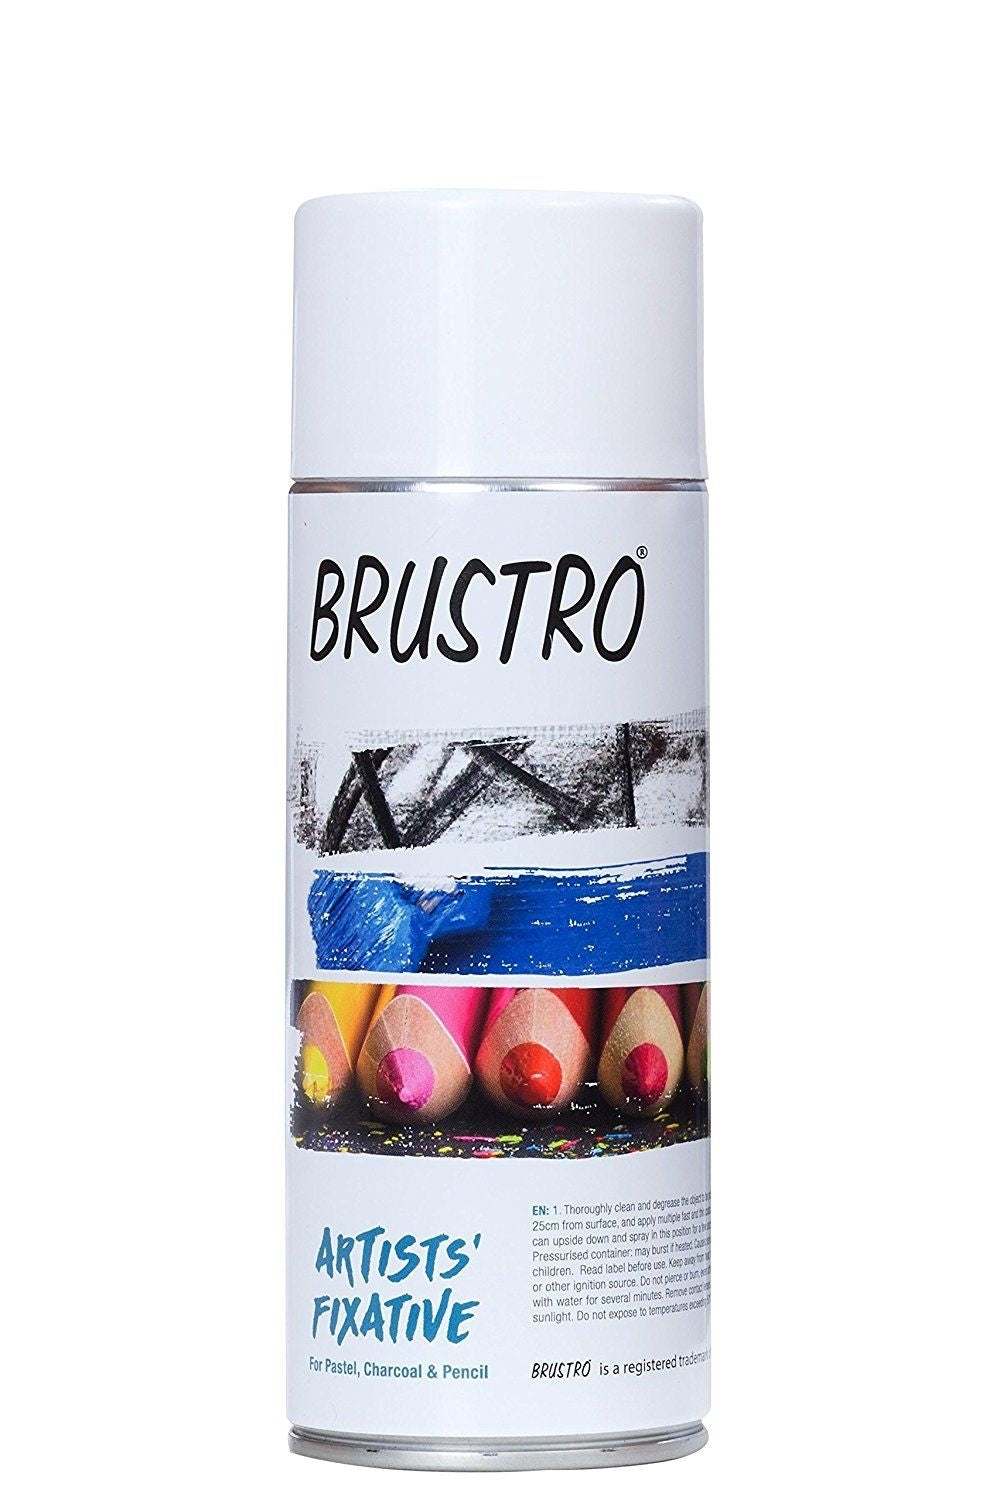 Brustro Artists’ Fixative 400 ml spray can ( Made In Spain )